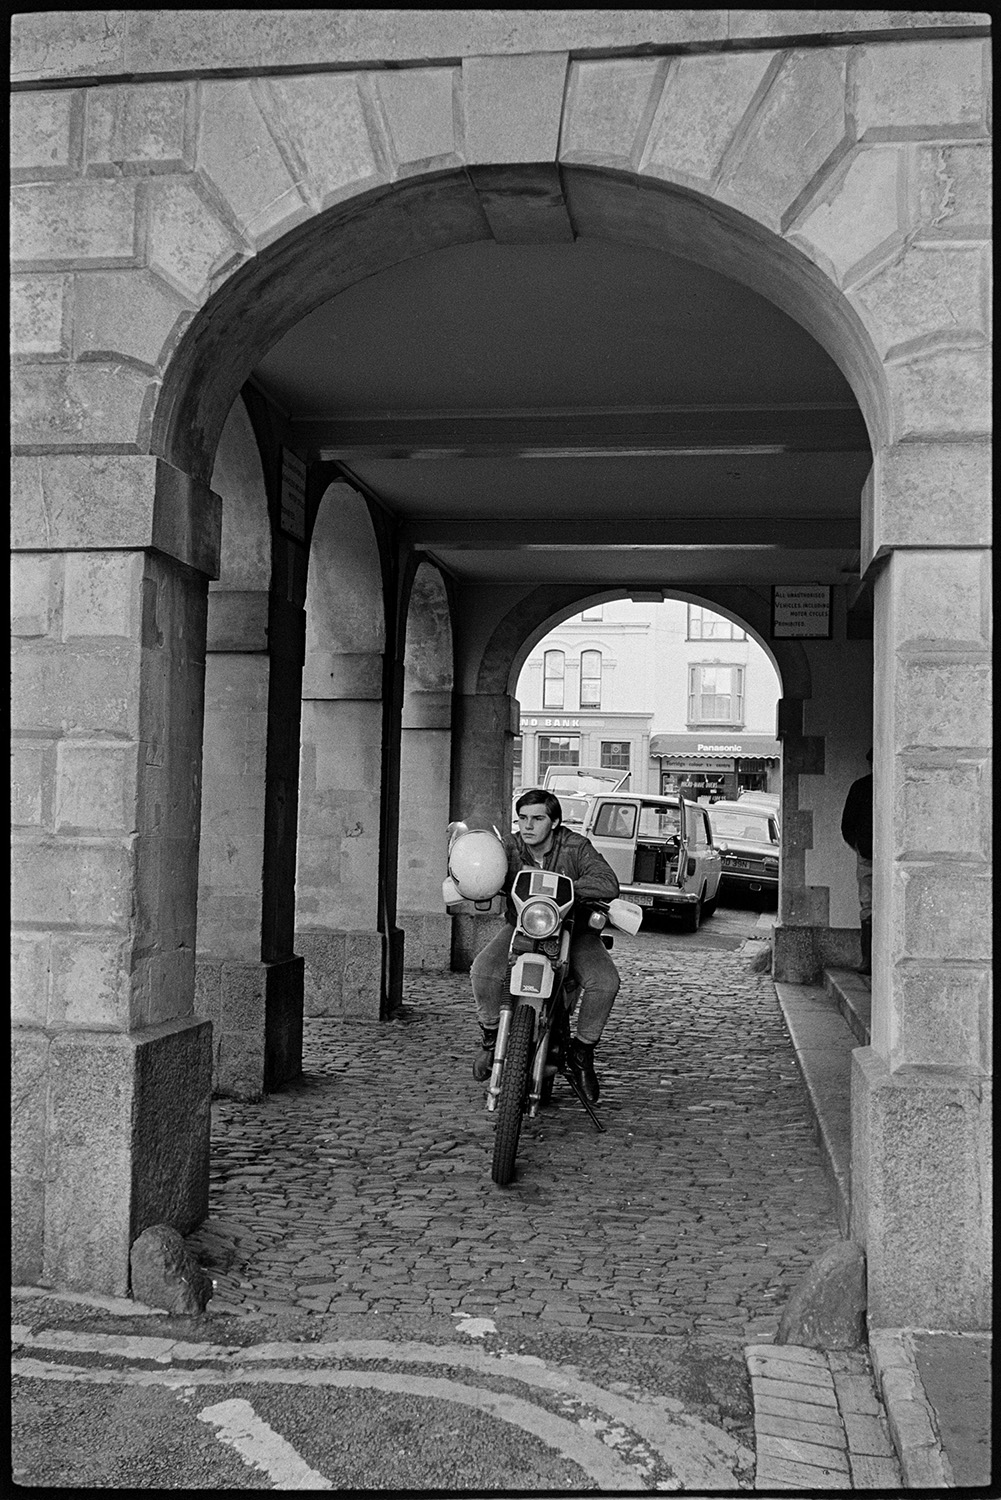 Men chatting under Town Hall arches, motorbike rider parked. 
[A motorcyclist sat on his parked motorbike on the cobbles under the arches of the Town Hall in Torrington. A parked van is visible in the background with shop fronts beyond.]